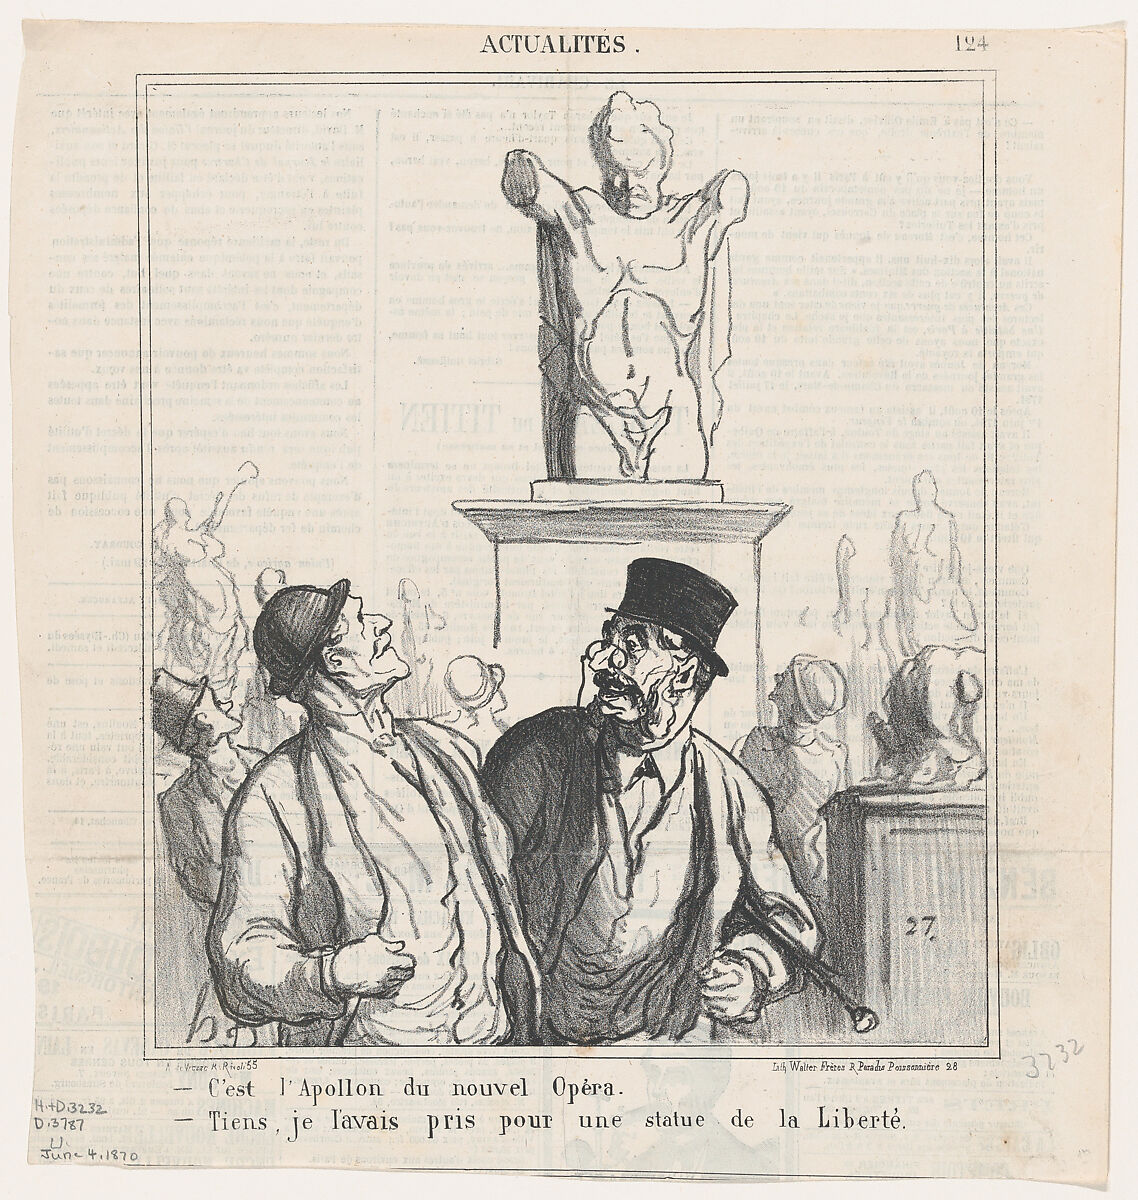 –It's the Apollo of the new opera. –Well, I had taken it for the statue of liberty, from 'News of the day,' published in Le Charivari, June 4, 1870, Honoré Daumier (French, Marseilles 1808–1879 Valmondois), Lithograph on newsprint; third state of three (Delteil) 